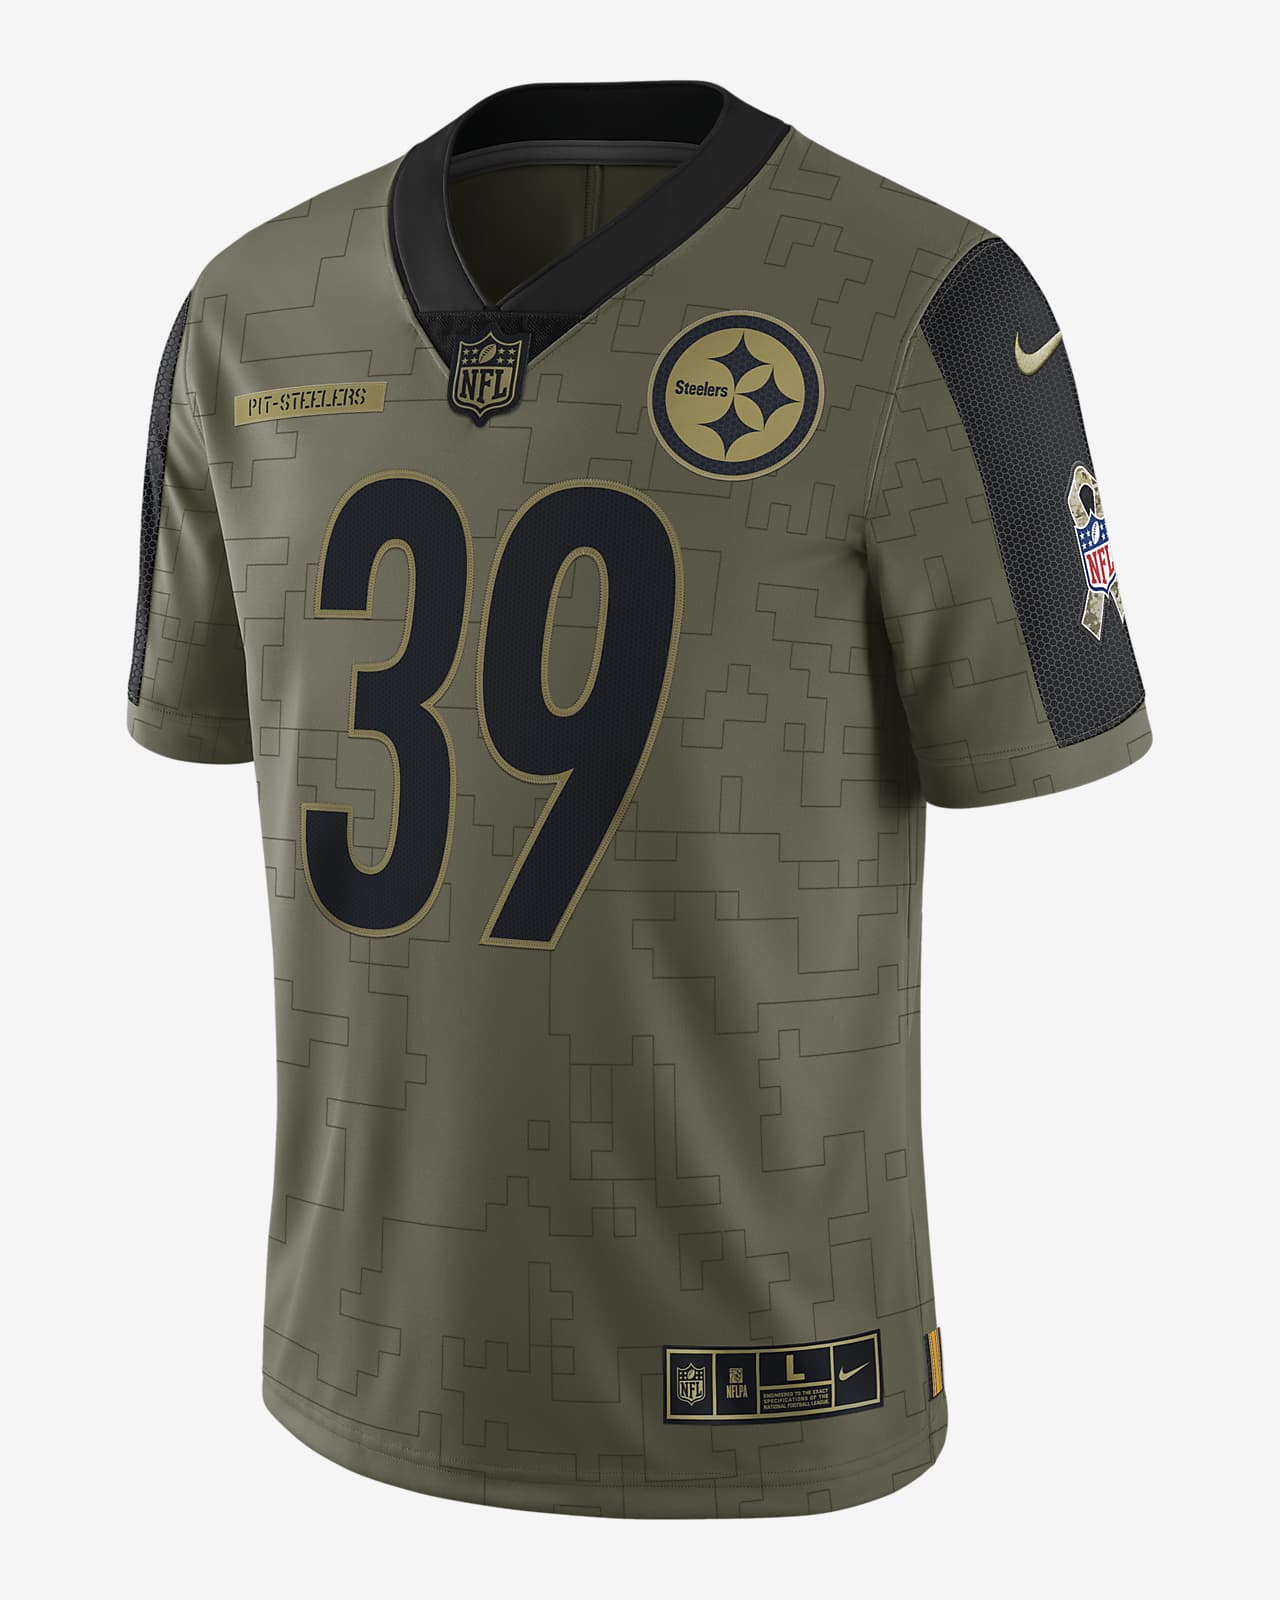 NFL Pittsburgh Steelers Salute to Service (Minkah Fitzpatrick) Men's Limited Football Jersey